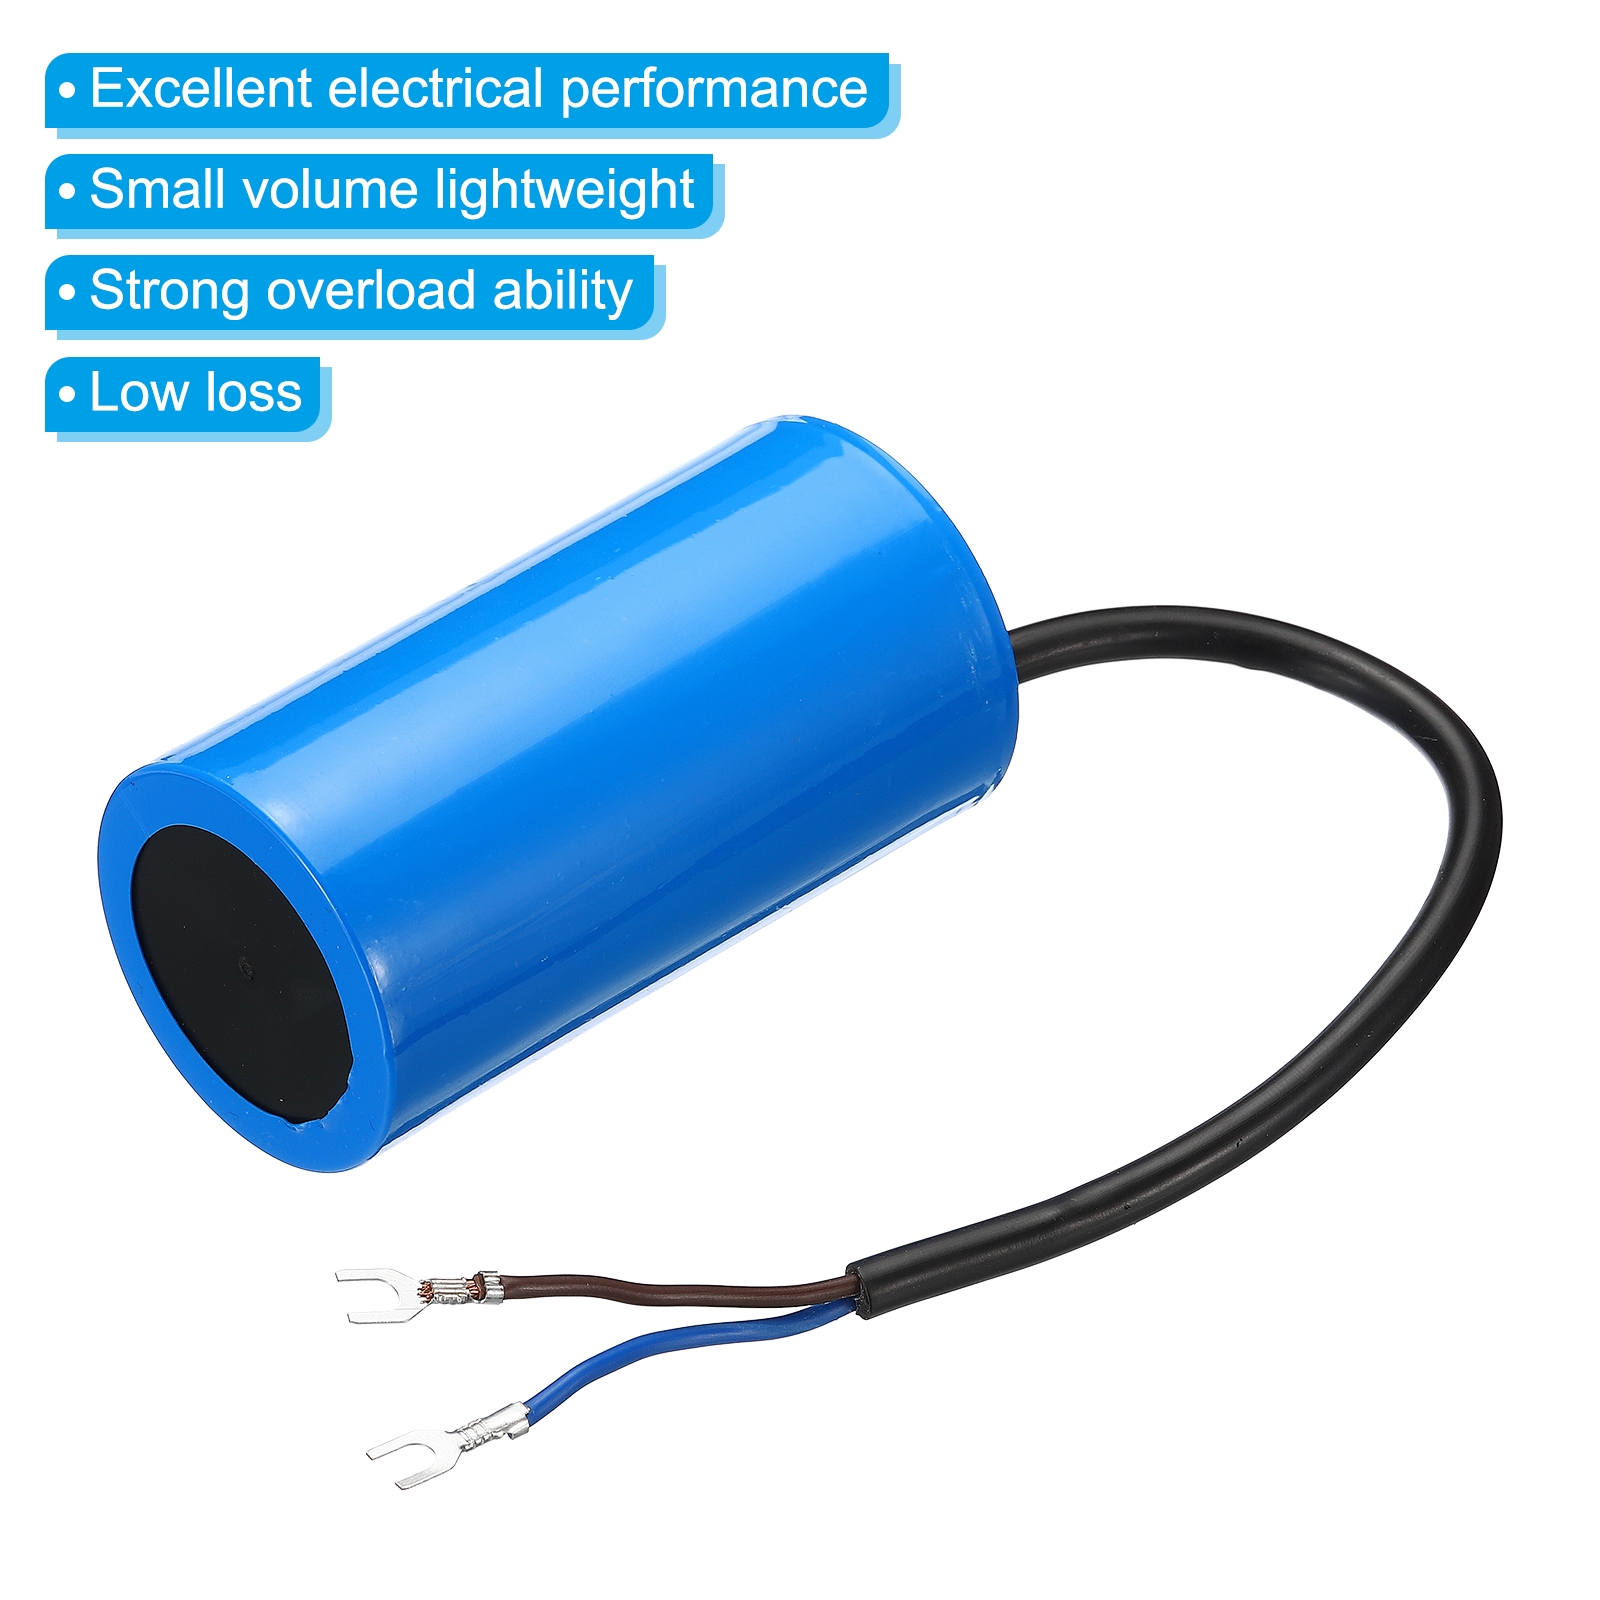 CBB60 30uF Running Capacitor, 3pcs AC 450V 2 Wires 50/60Hz Cylinder 90x50mm for Motor Start - image 4 of 5